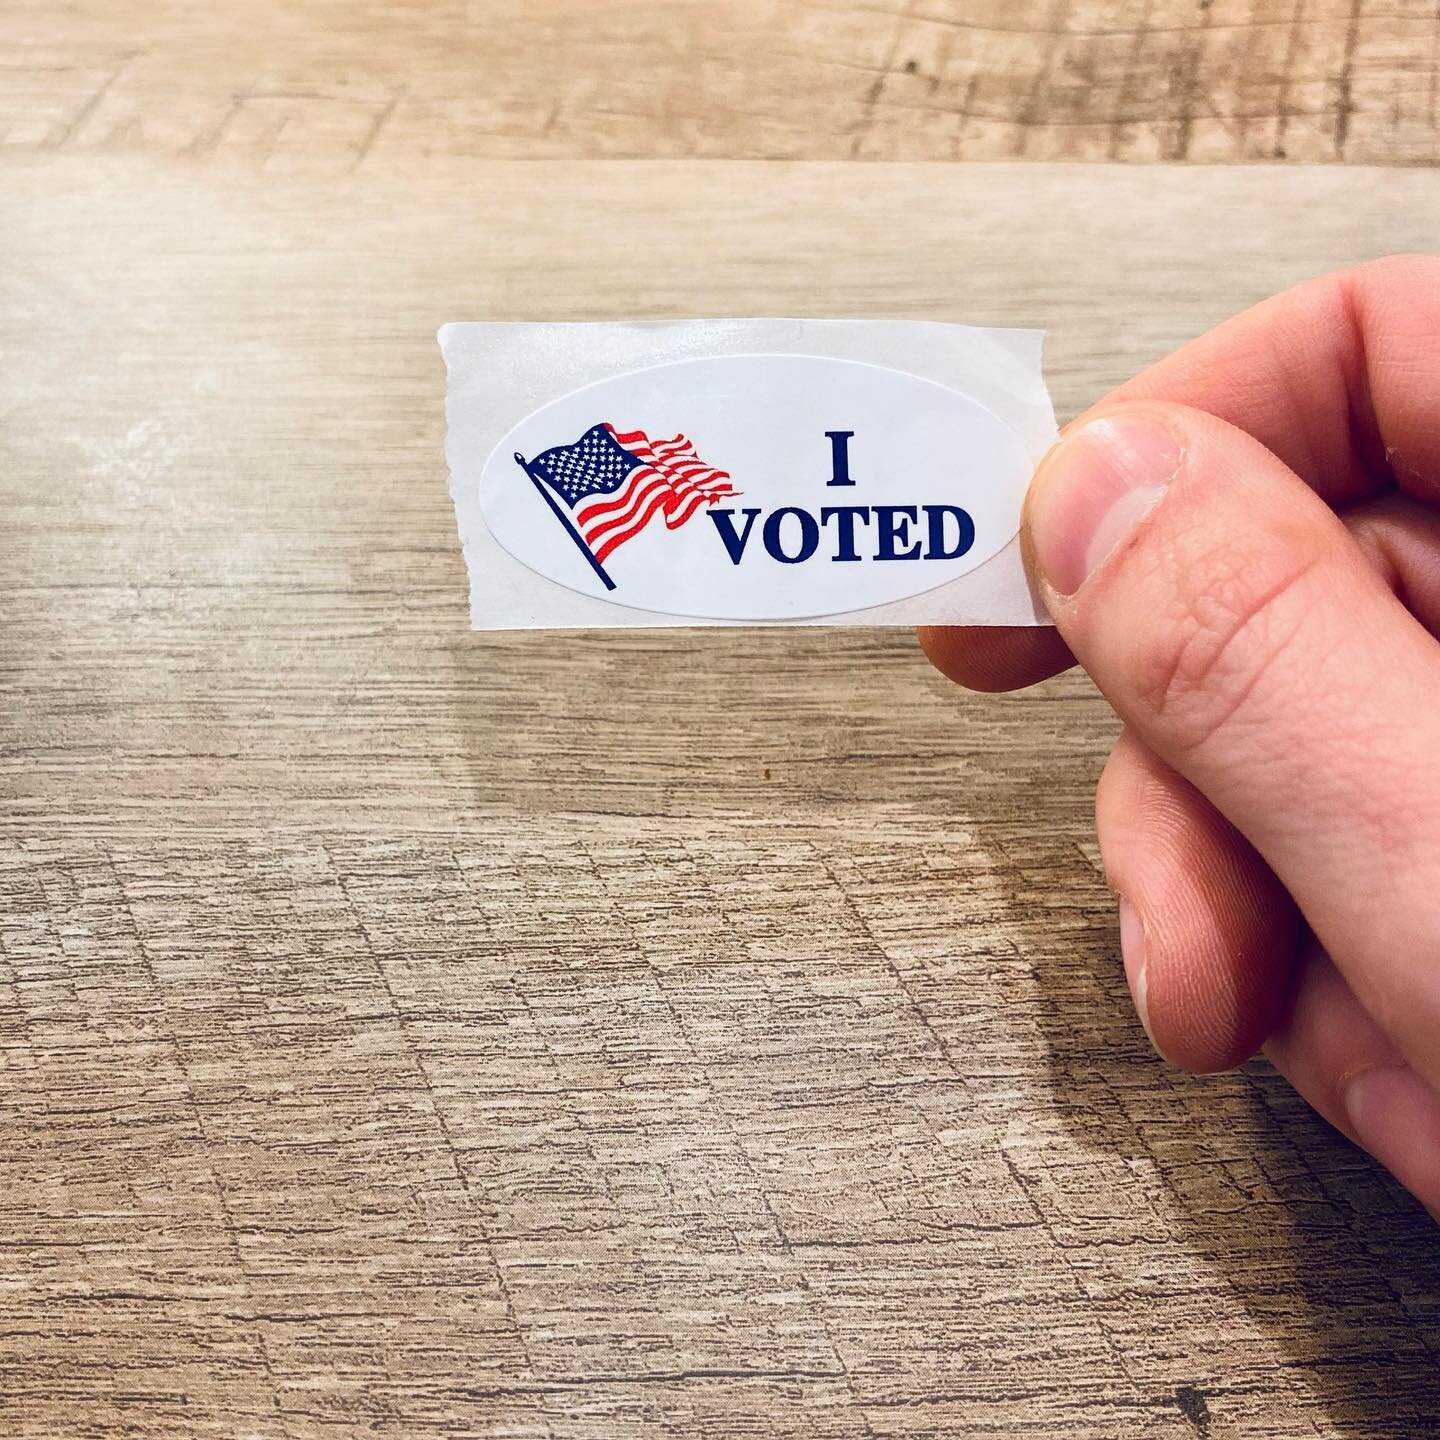 A privilege I will never take lightly. 🇺🇸 

As women, I cannot help but be grateful for the privilege to vote. This right was fearlessly fought for in this country and is one which many are still fighting for around the world. 🌍 

I am so thankful